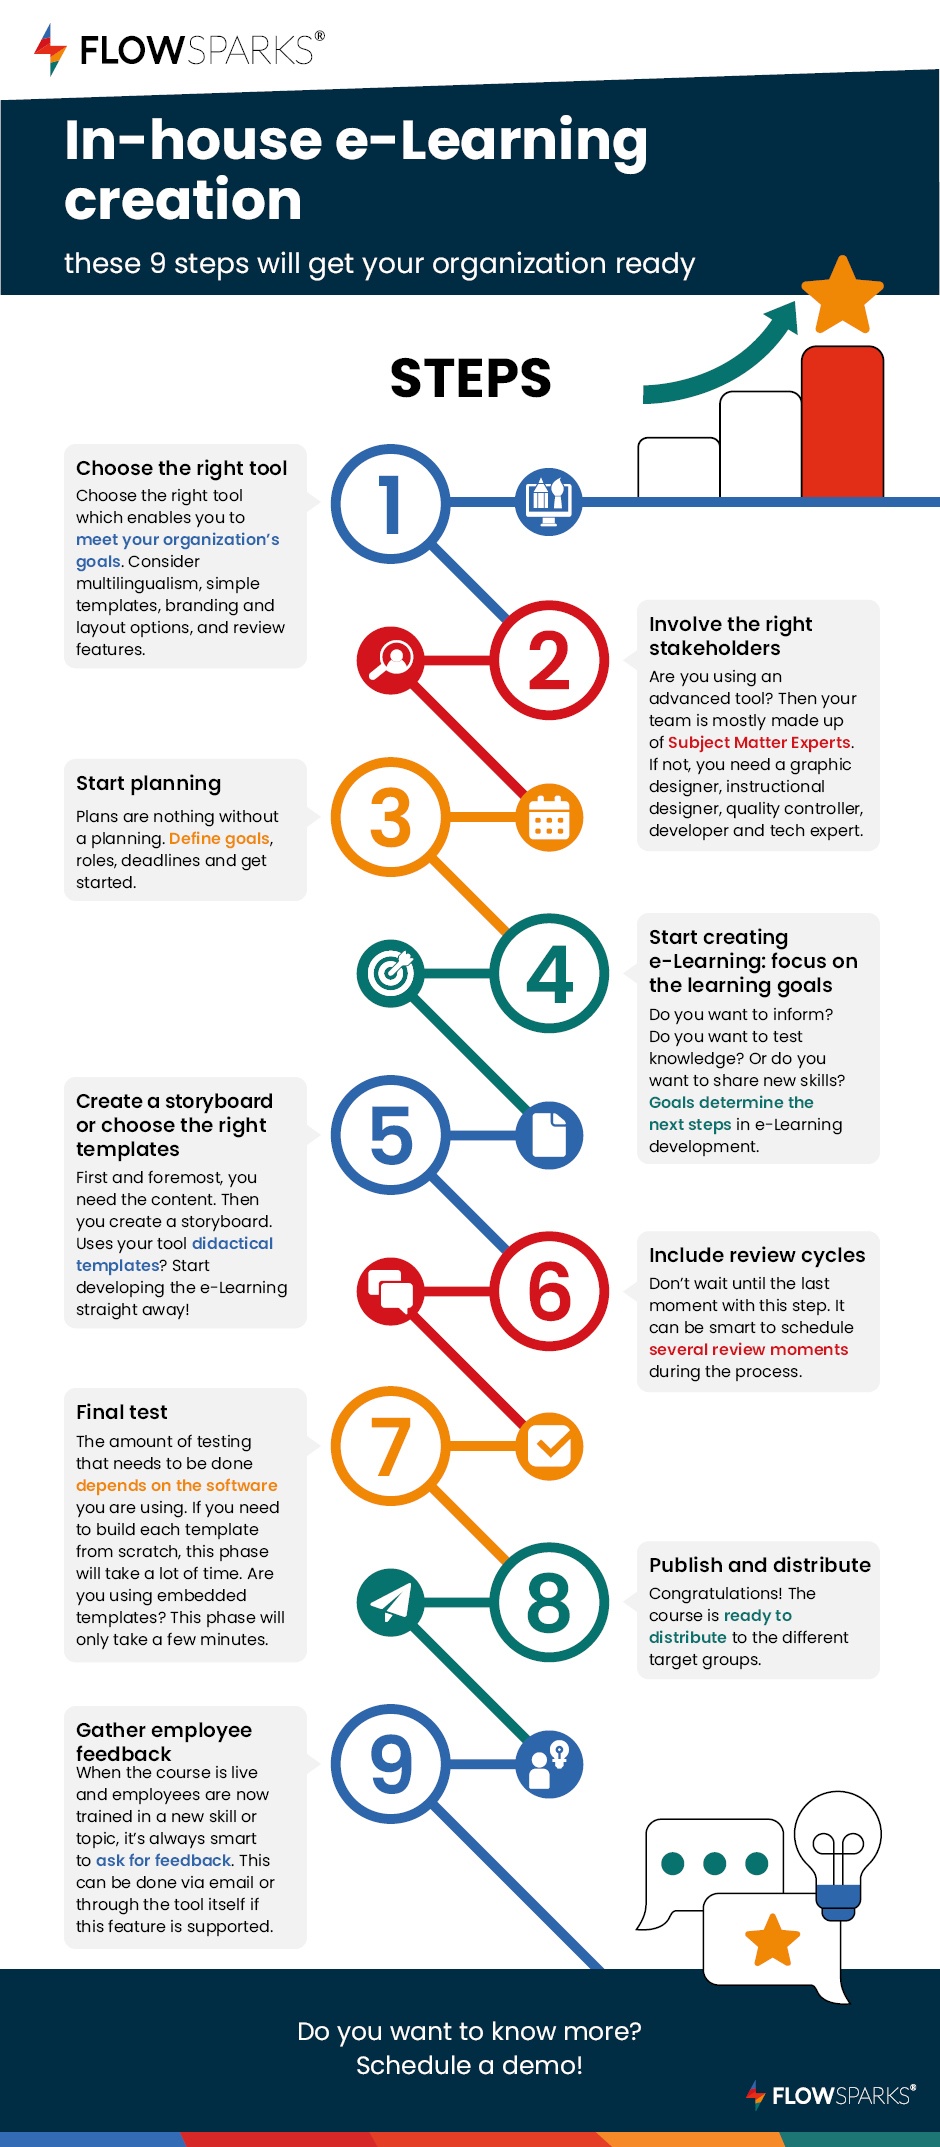 9 Steps To Create E-Learning In-House - Infographic